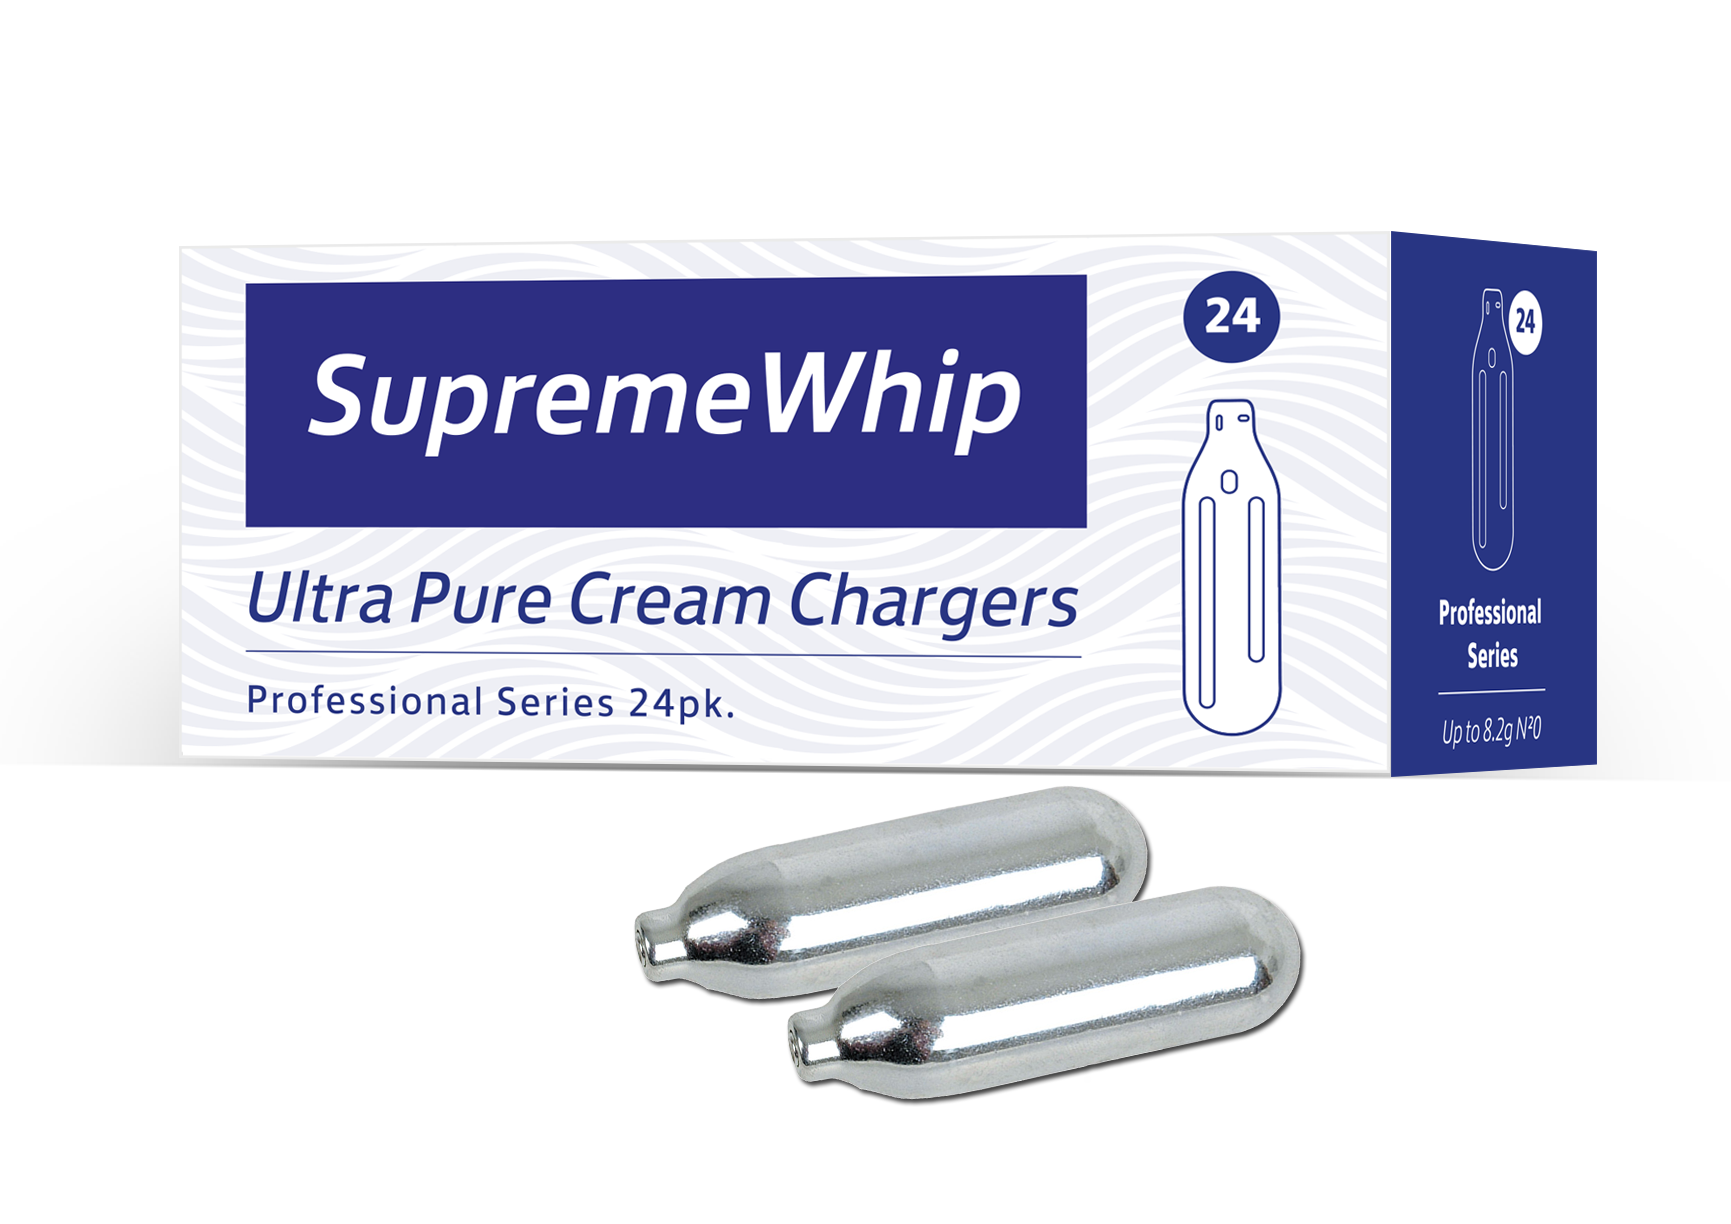 Easy-to-use cream charger kit